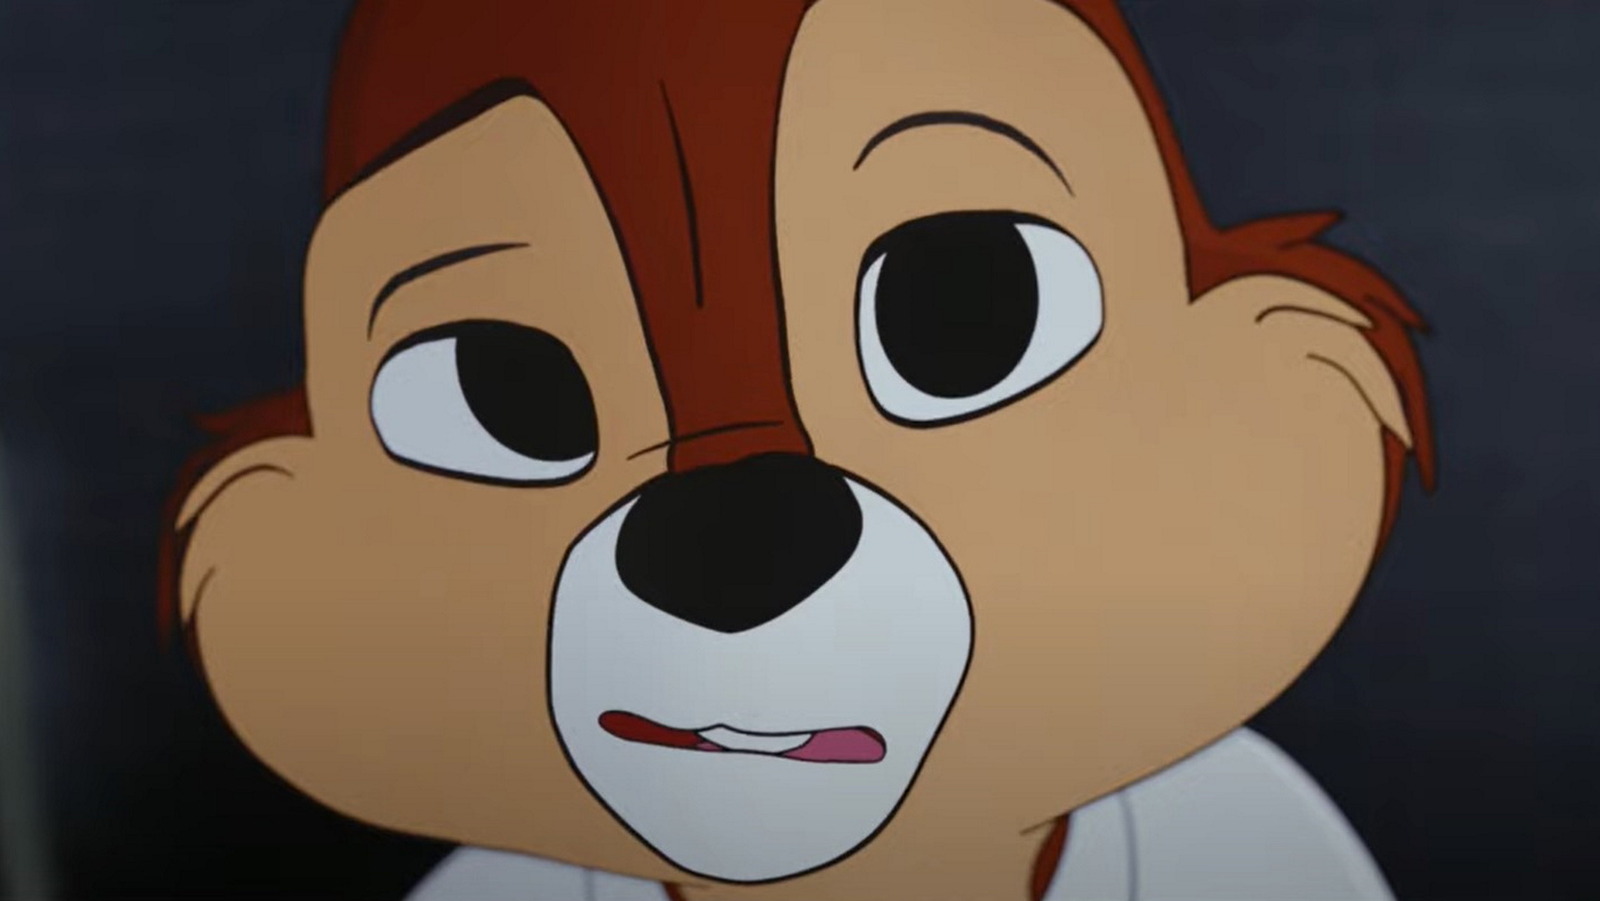 Chip 'n Dale: Rescue Rangers (2022)